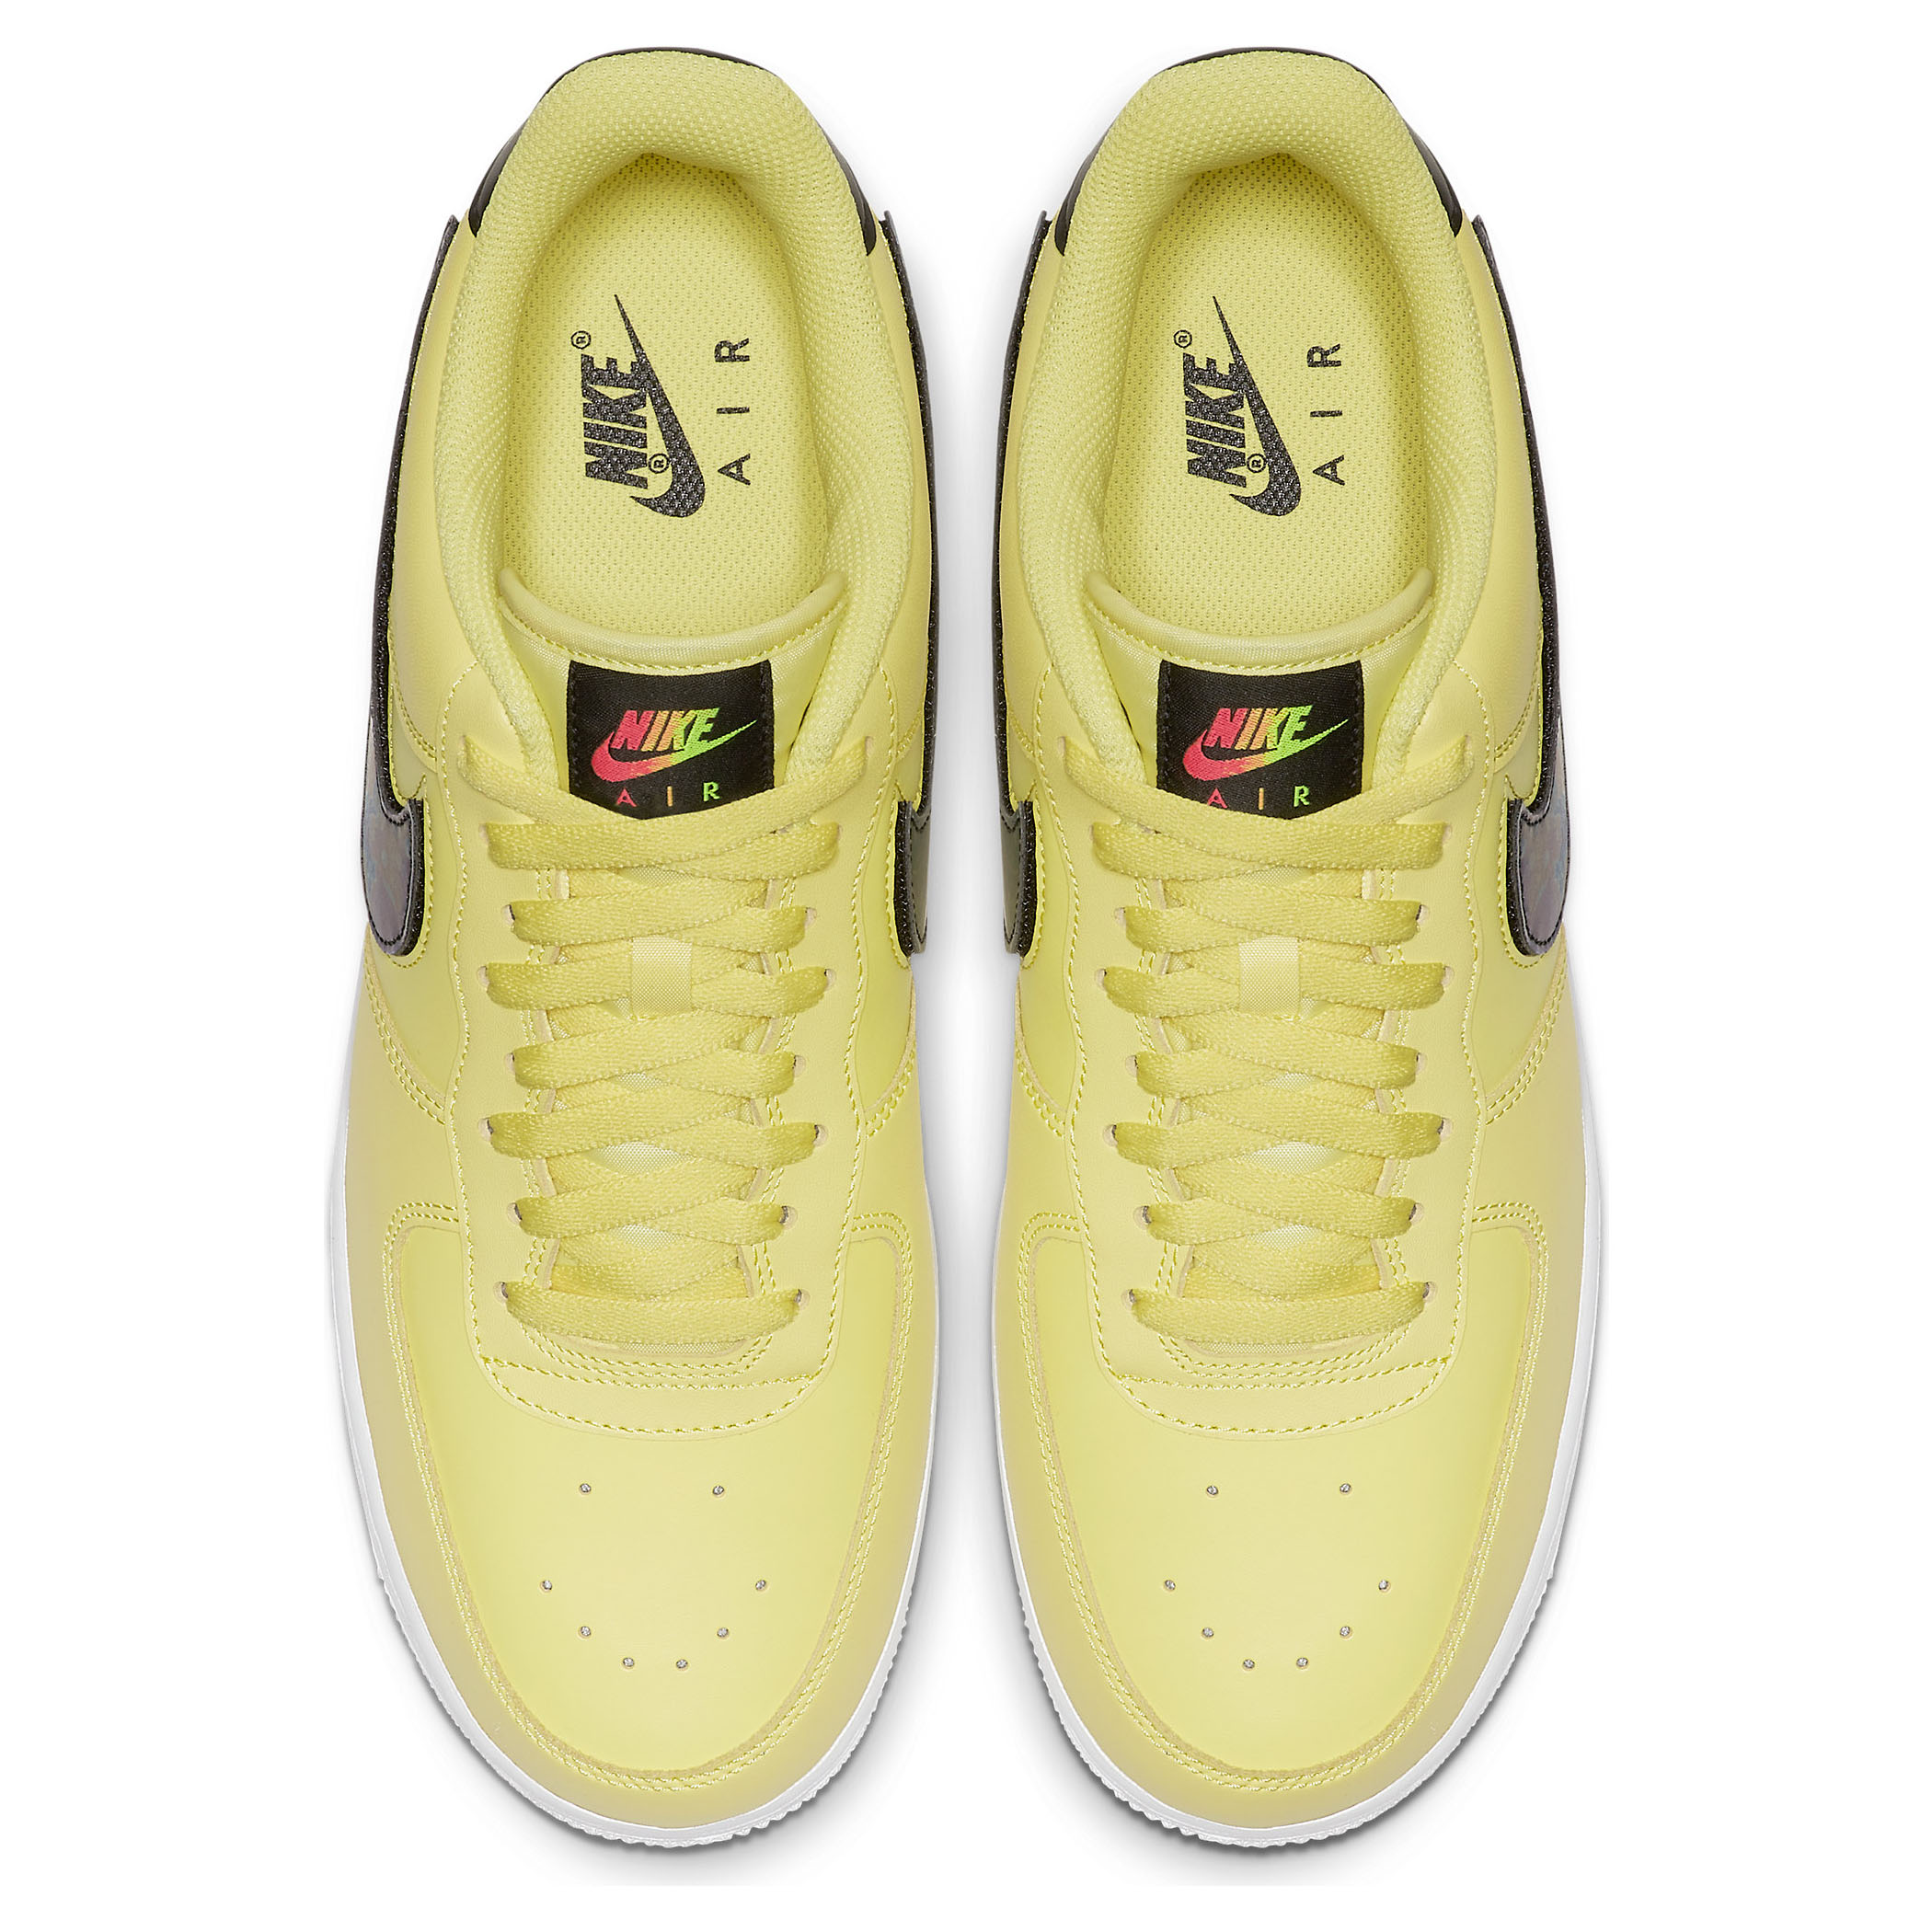 air force 1 lv8 yellow pulse